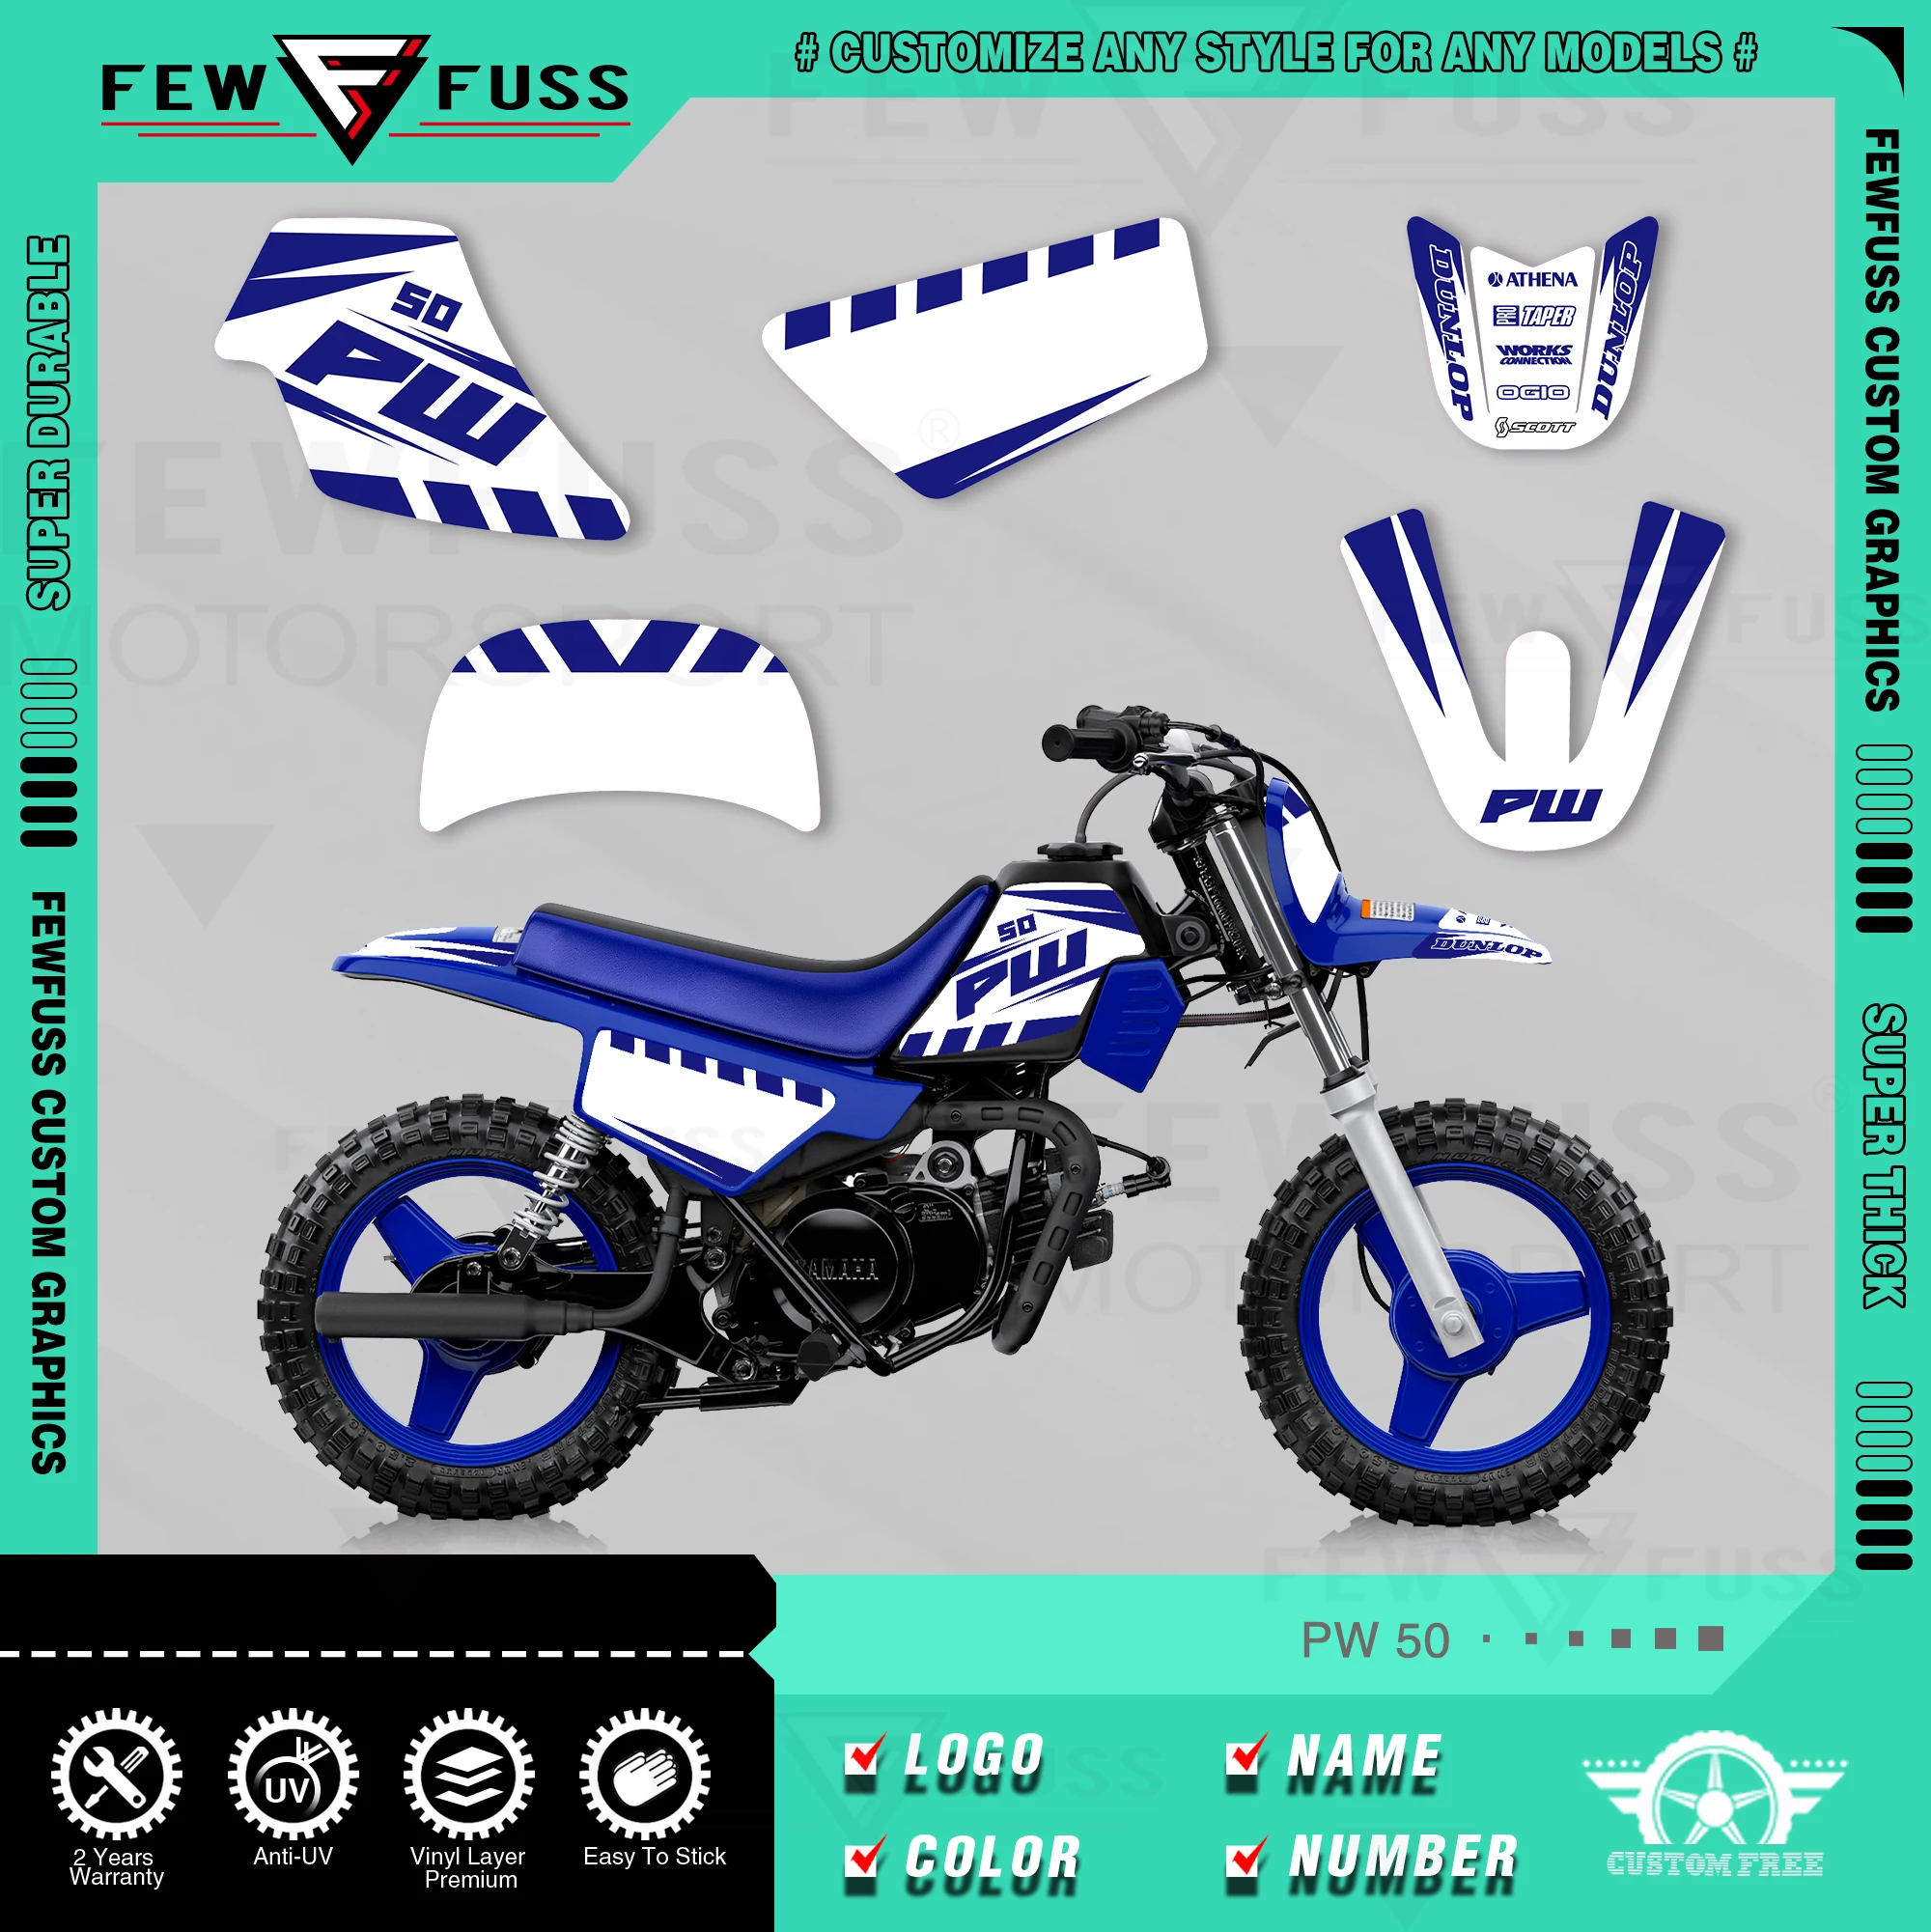 fewfuss-custom-team-graphics-backgrounds-decals-3m-stickers-kit-for-yamaha-pw50-motorcycle-sticker-003